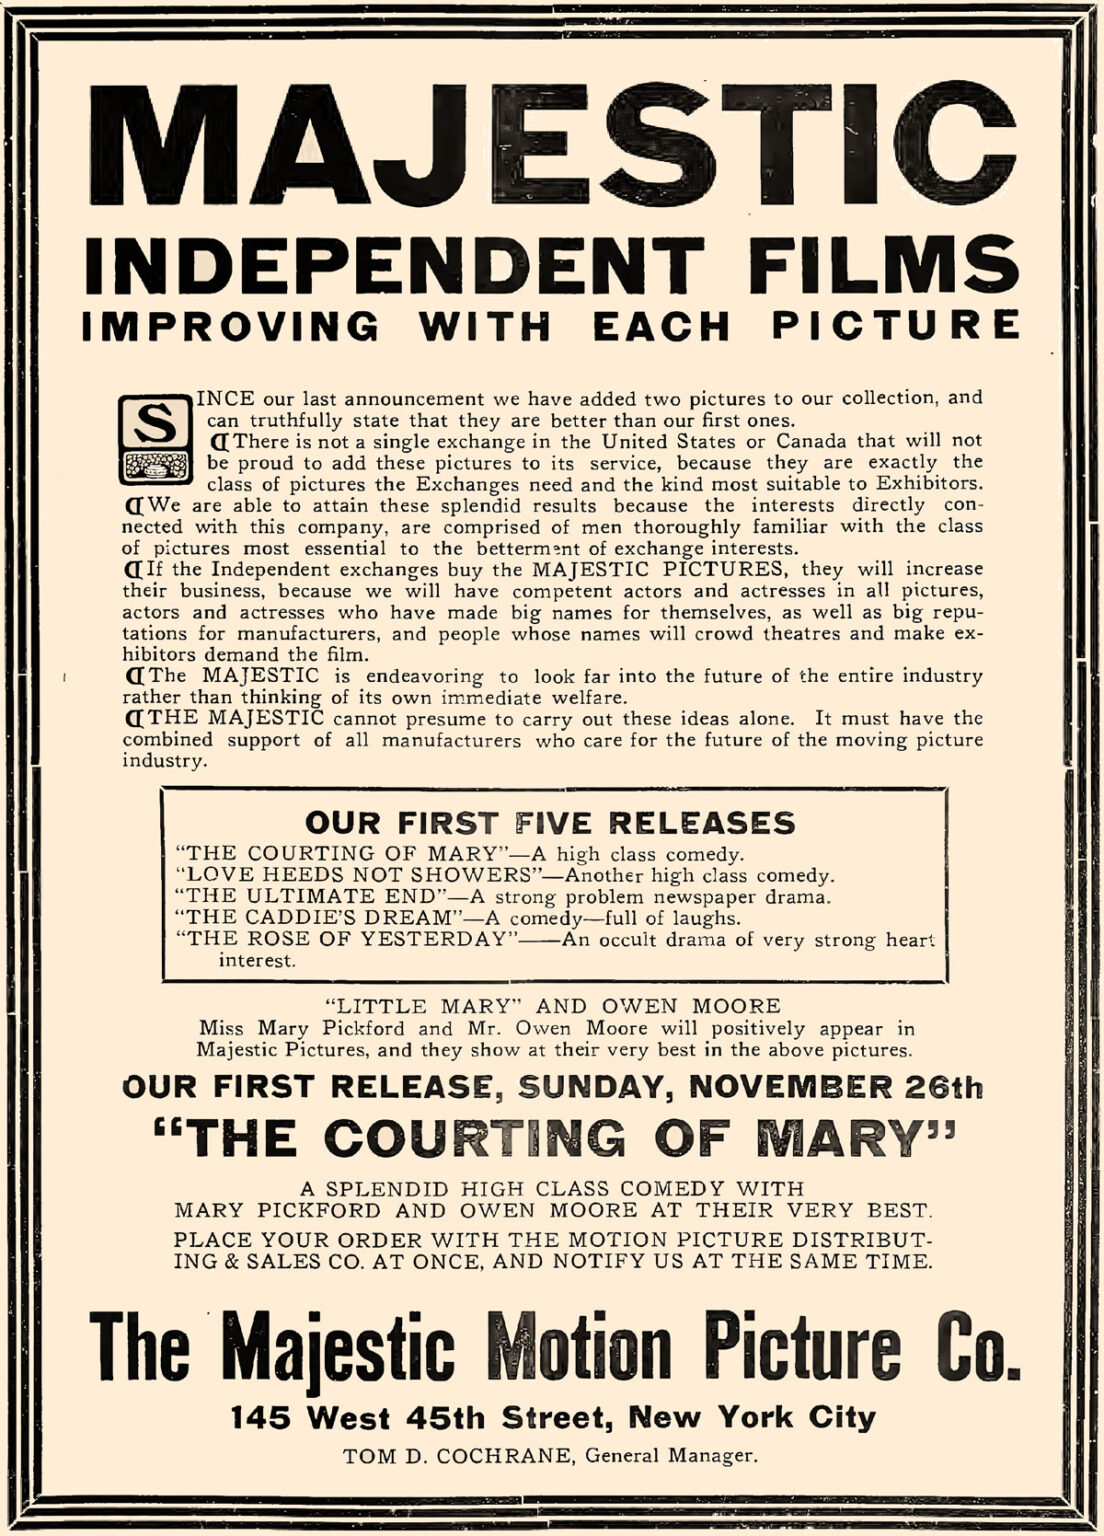 Majestic Motion Picture Company’s Iconic 1911 Poster